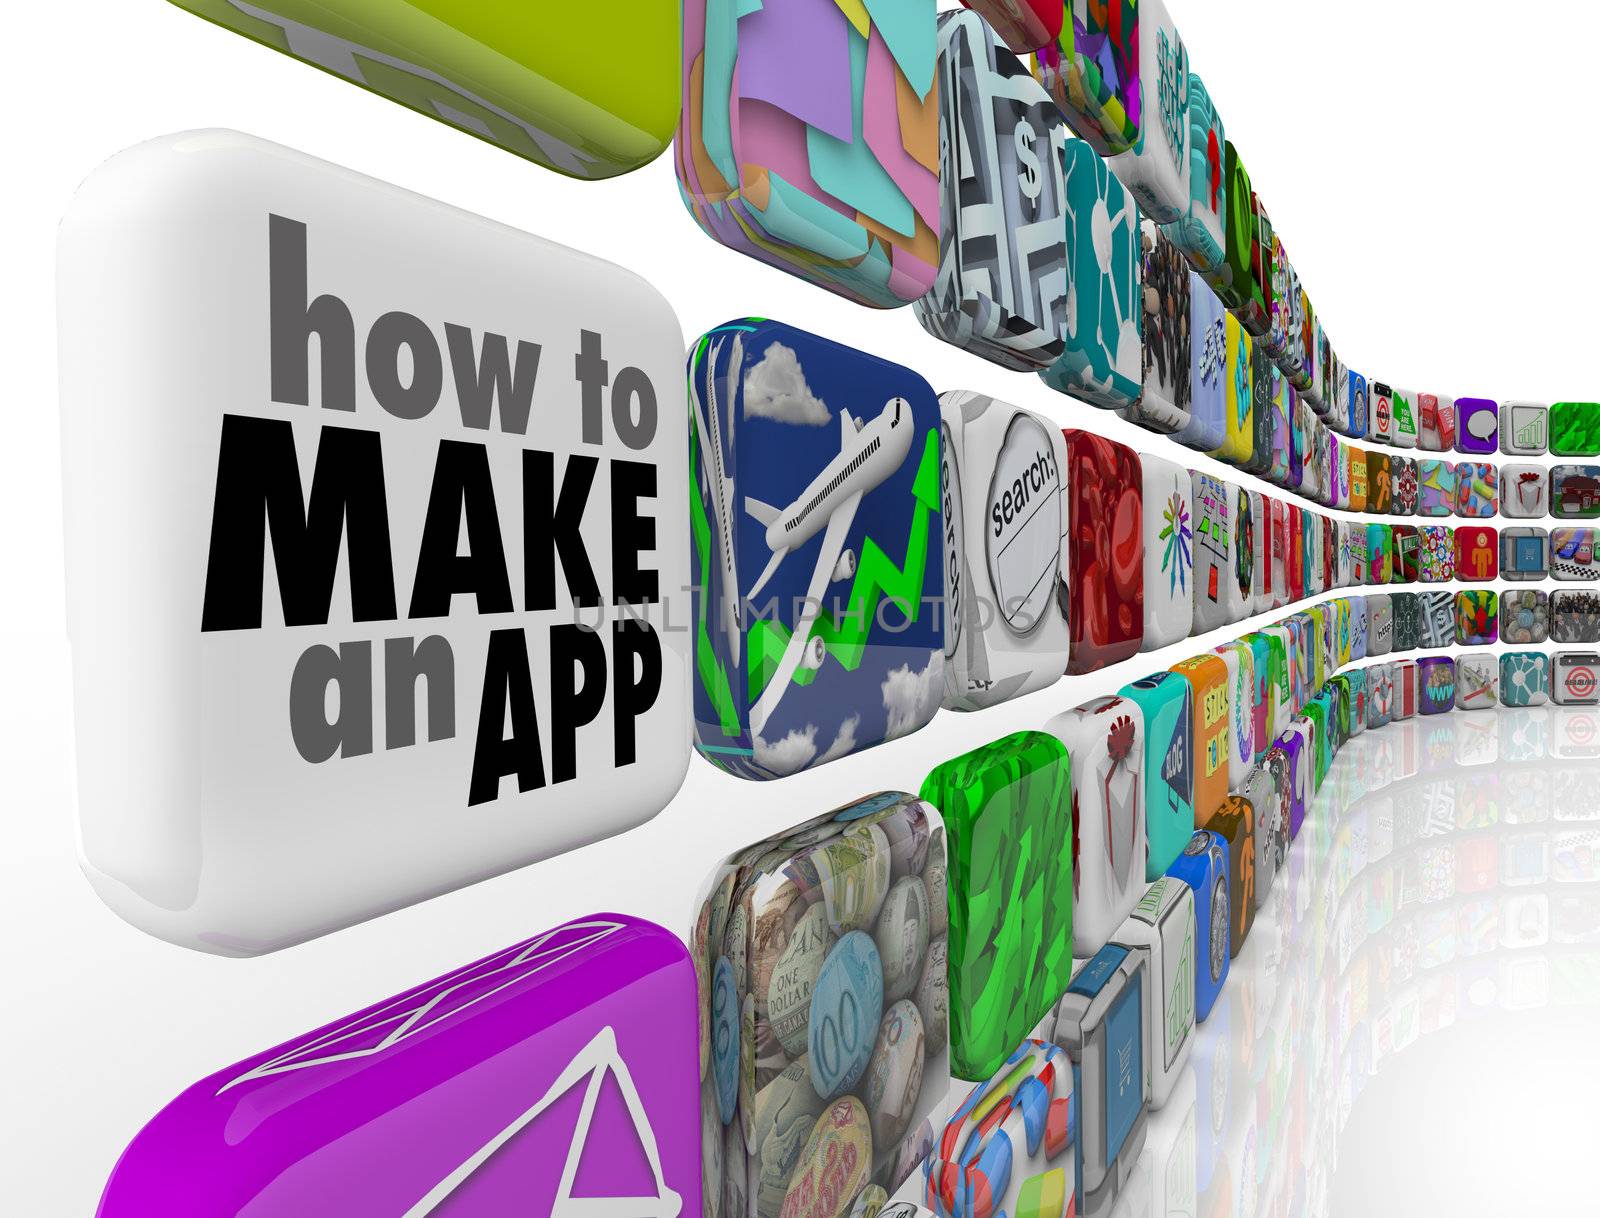 How to Make an App message on a white application tile in a wall of downloadable software icons, promising advice and instructions on programming or developing apps for phones and mobile devices